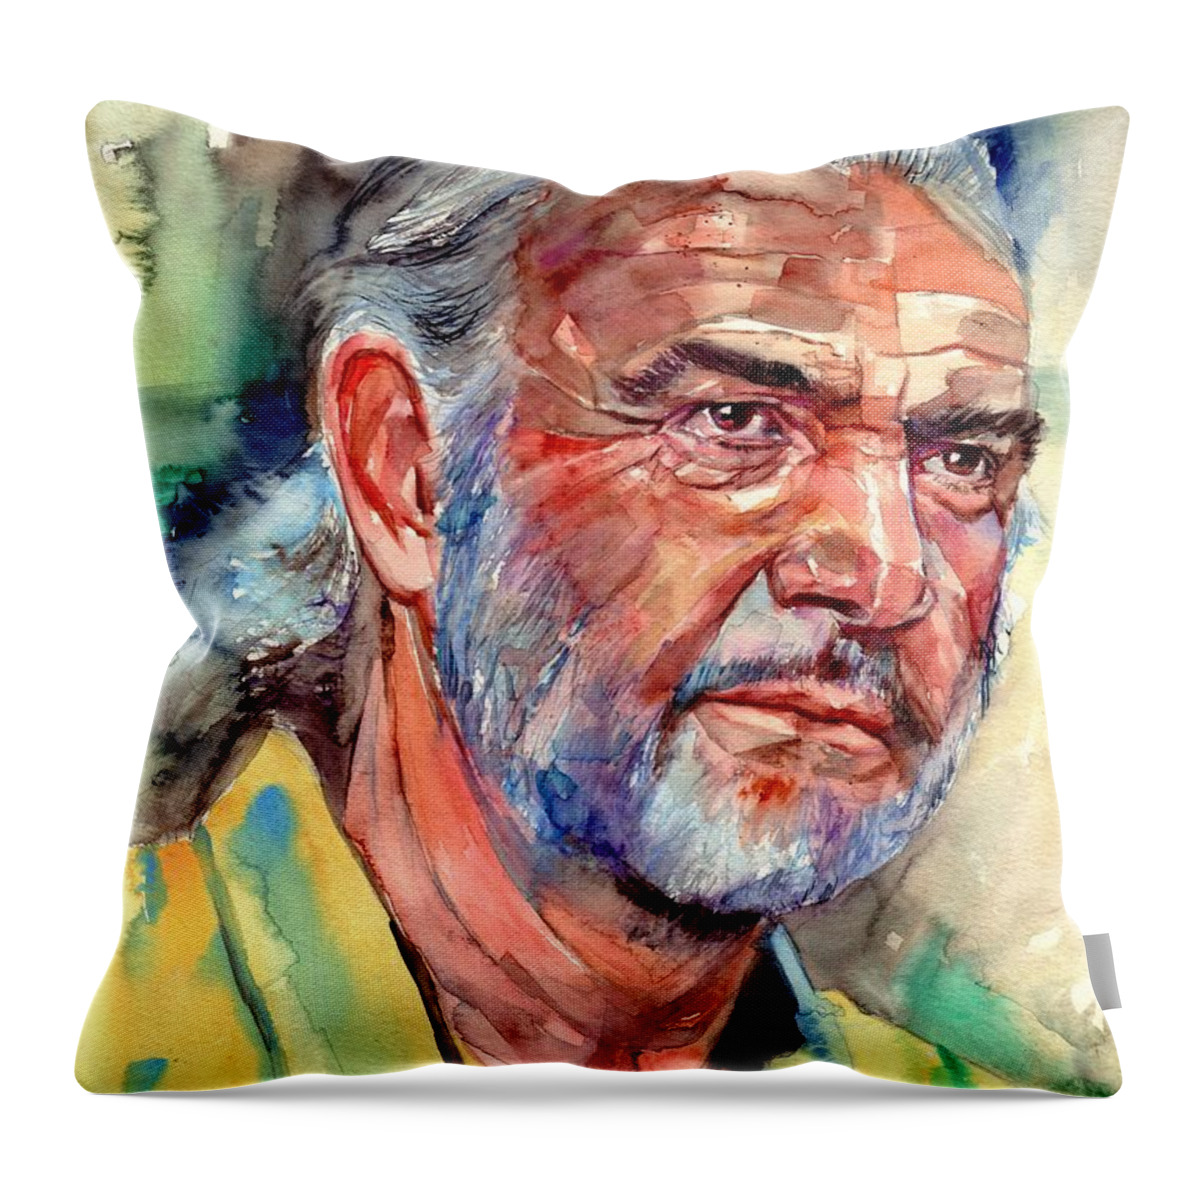 Sean Connery Throw Pillow featuring the painting Sean Connery Portrait by Suzann Sines